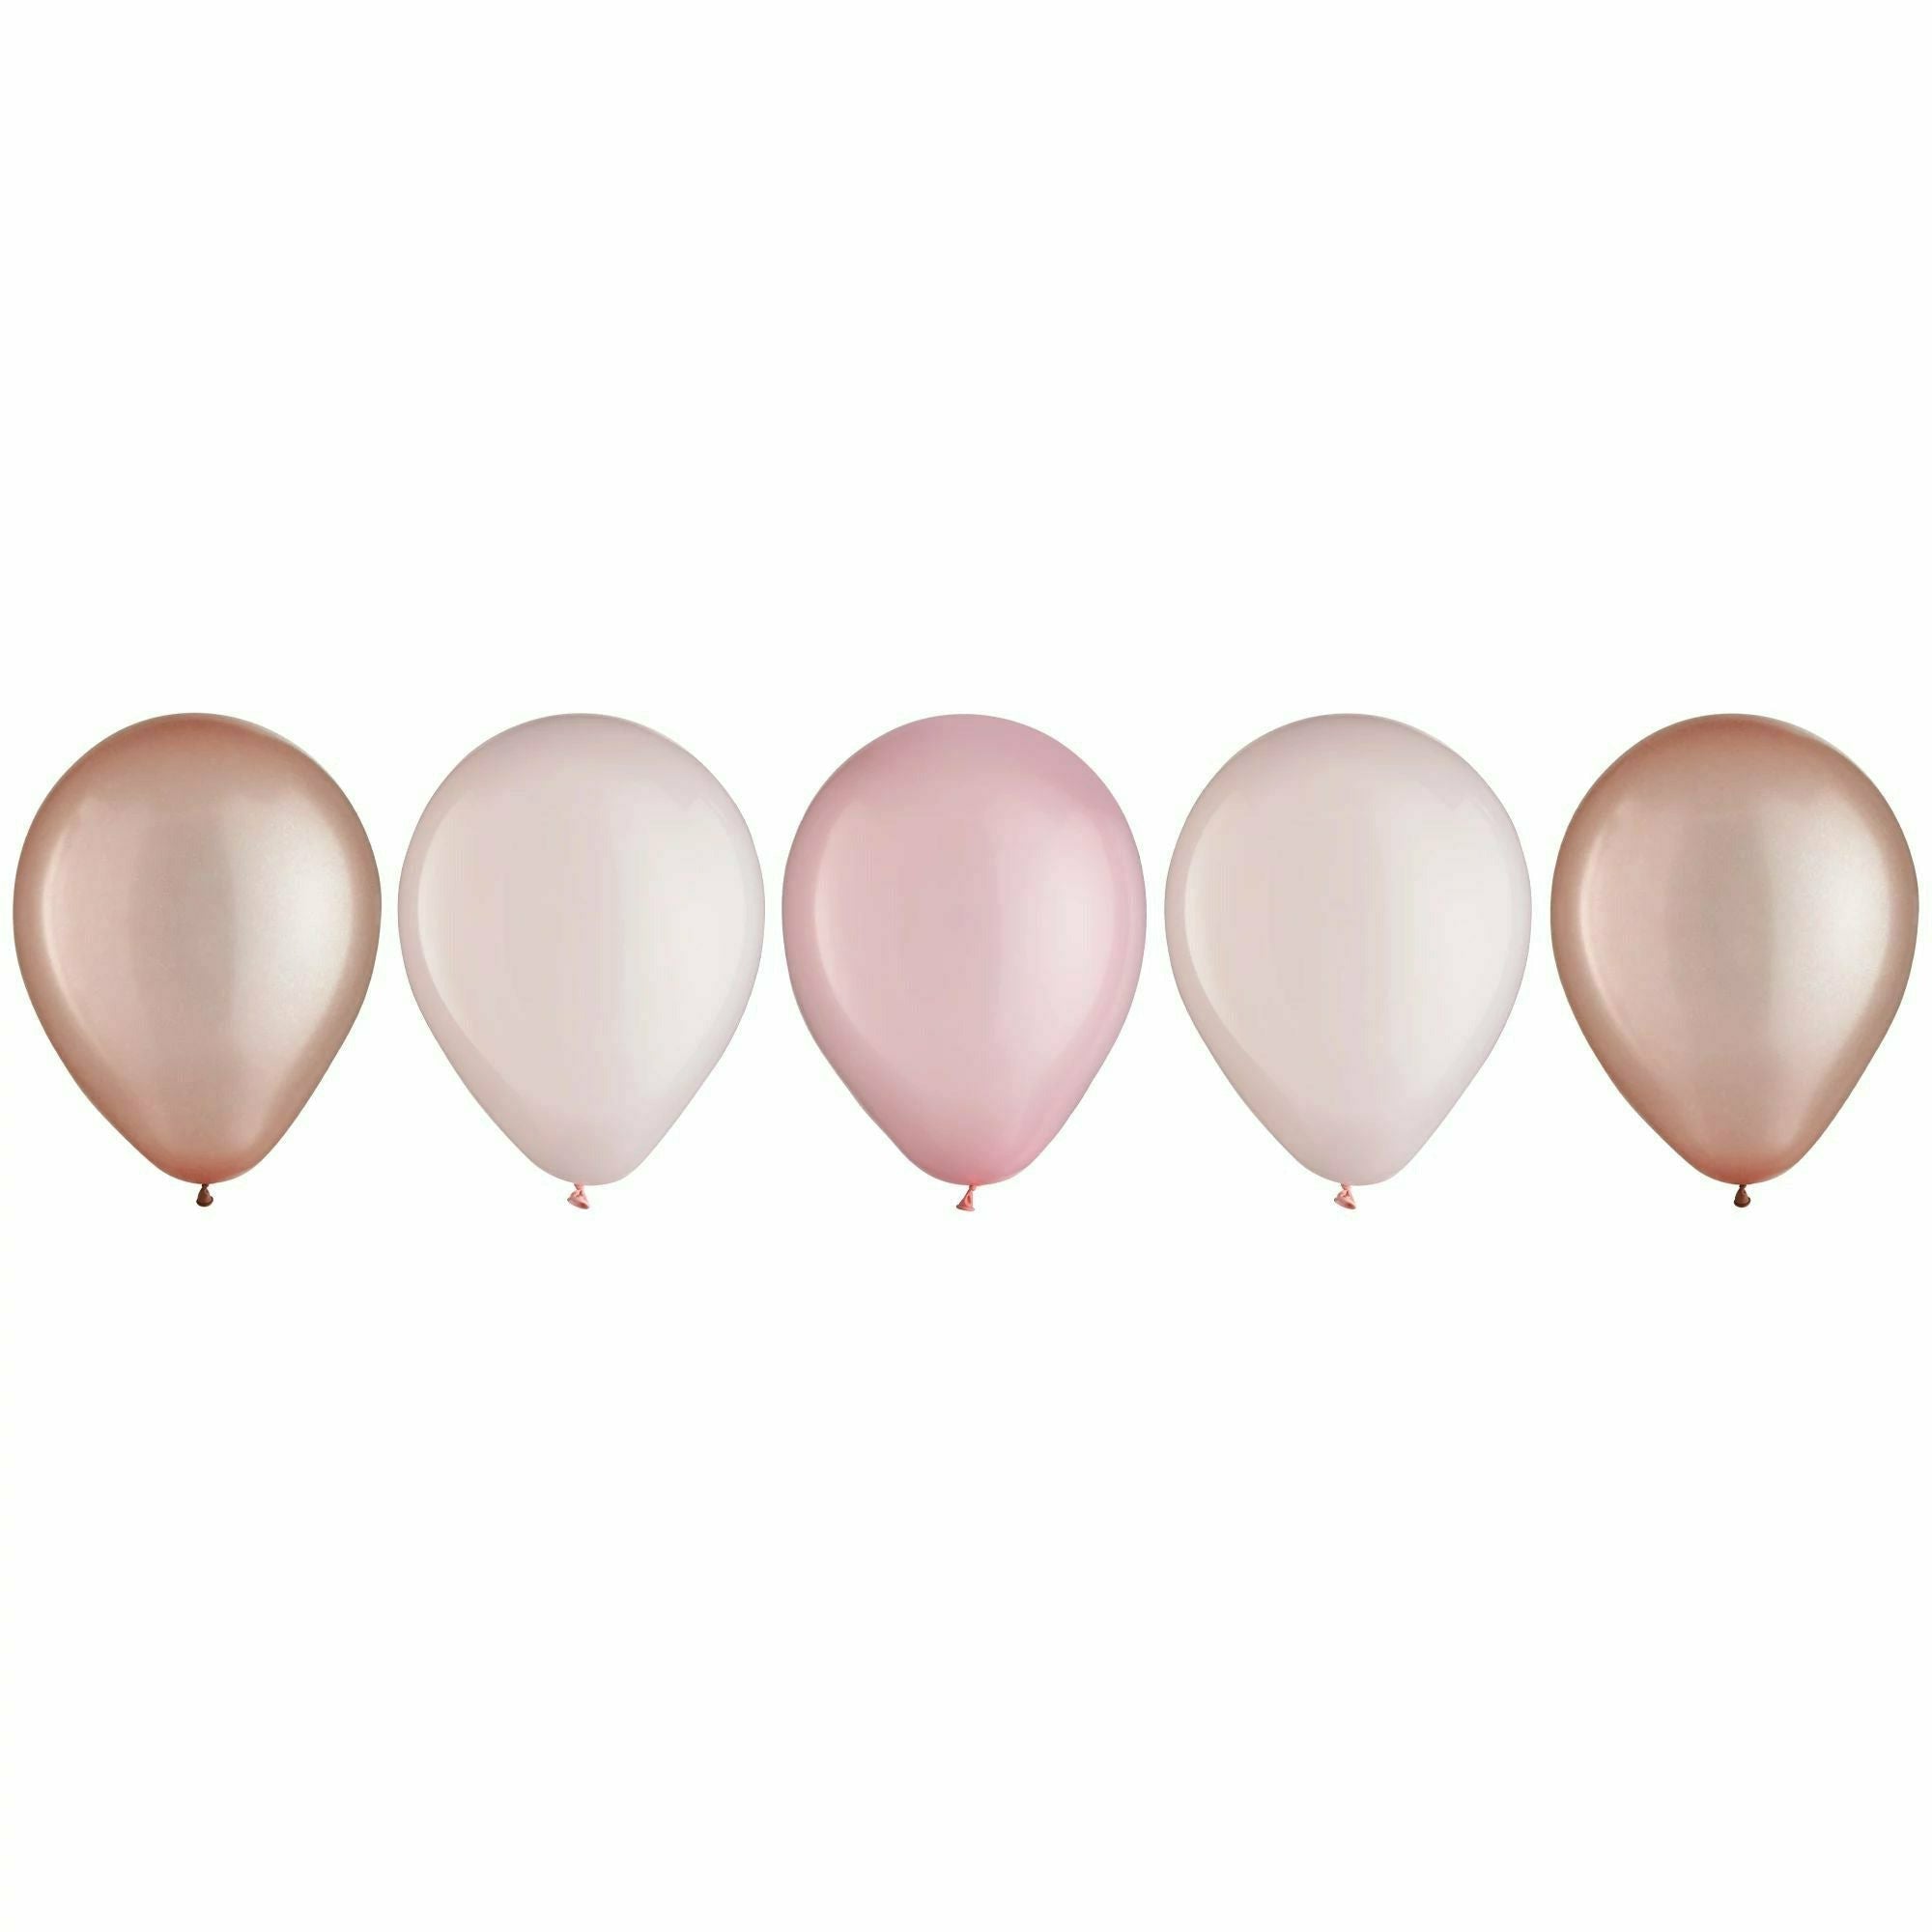 Amscan BALLOONS Latex Balloon Assortment - Rose Gold 15 Count 11in.